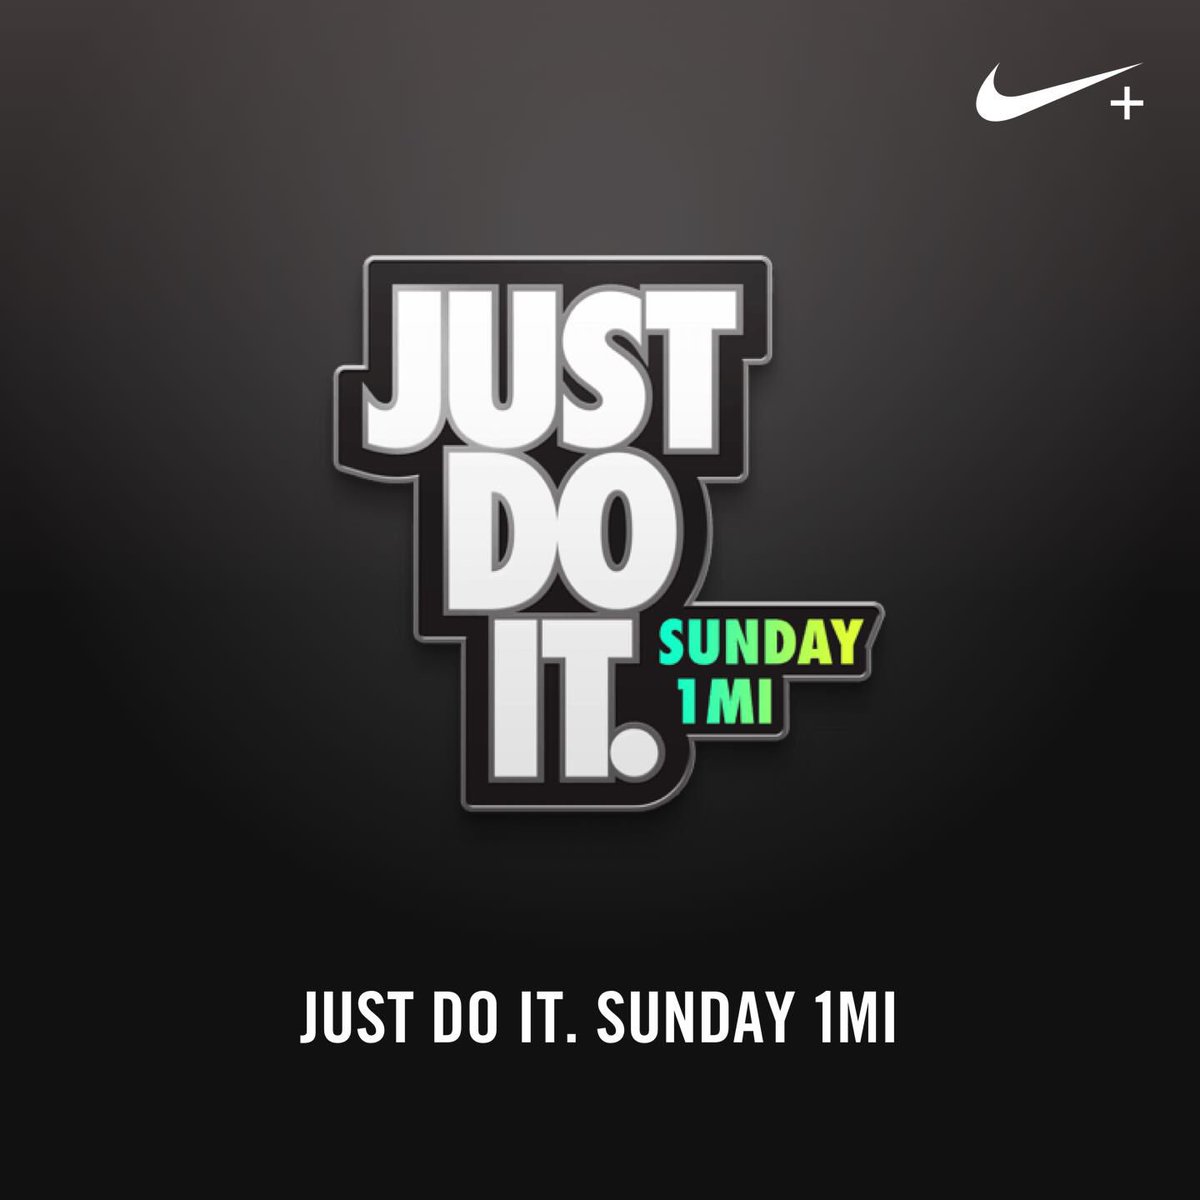 Ended the week with just a mile run to complete the Nike Run July weekly Challenge Now I can go ice my knee  #StayActive  #NikeRunClub  #nikerunning